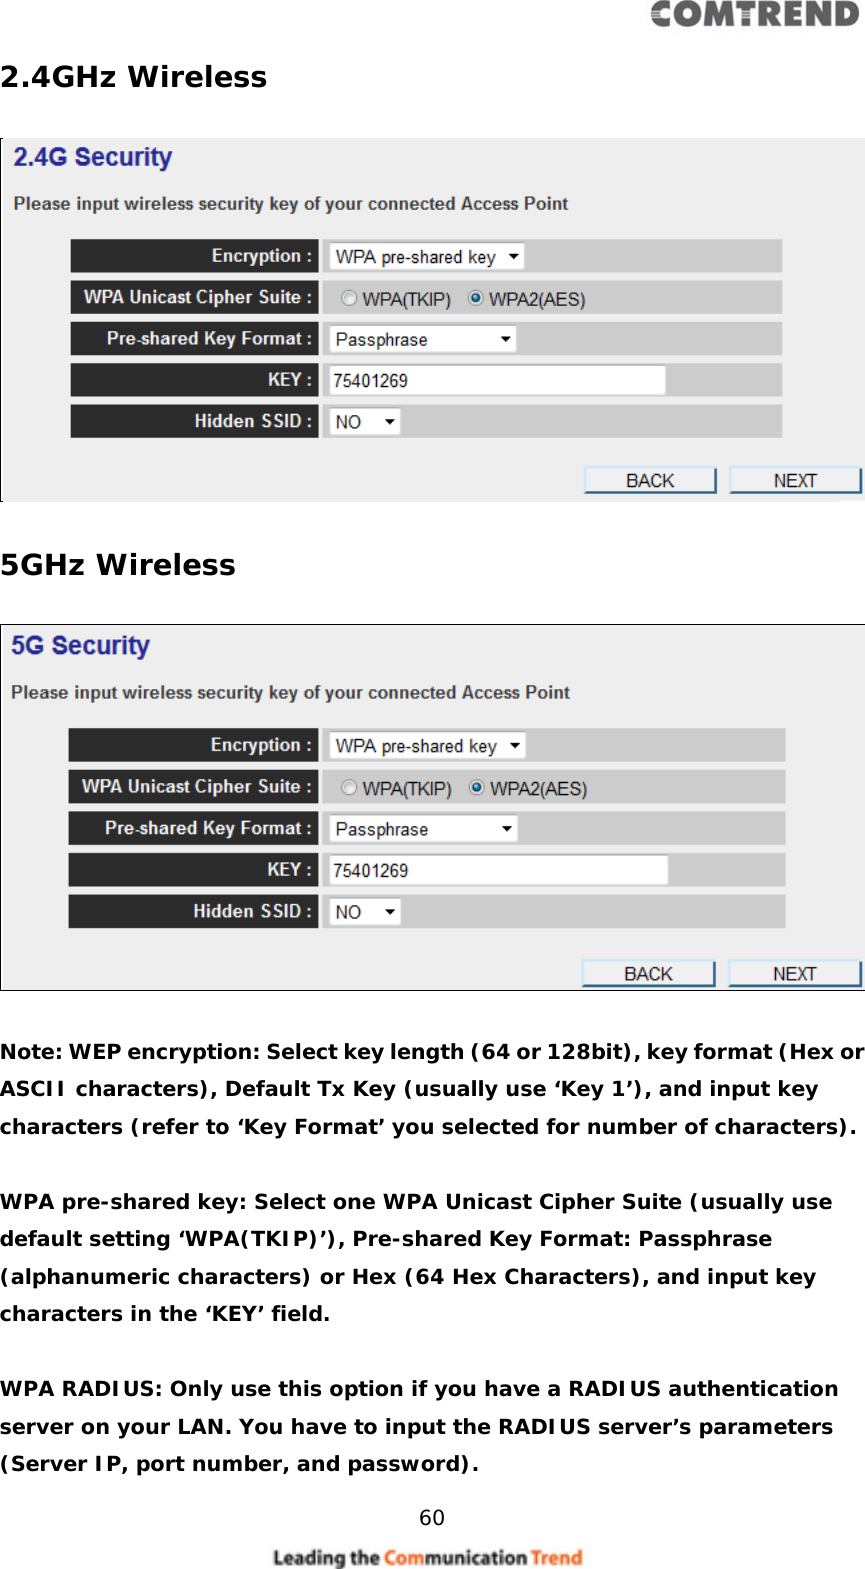     60  2.4GHz Wireless    5GHz Wireless    Note: WEP encryption: Select key length (64 or 128bit), key format (Hex or ASCII characters), Default Tx Key (usually use ‘Key 1’), and input key characters (refer to ‘Key Format’ you selected for number of characters).  WPA pre-shared key: Select one WPA Unicast Cipher Suite (usually use default setting ‘WPA(TKIP)’), Pre-shared Key Format: Passphrase (alphanumeric characters) or Hex (64 Hex Characters), and input key characters in the ‘KEY’ field.  WPA RADIUS: Only use this option if you have a RADIUS authentication server on your LAN. You have to input the RADIUS server’s parameters (Server IP, port number, and password). 